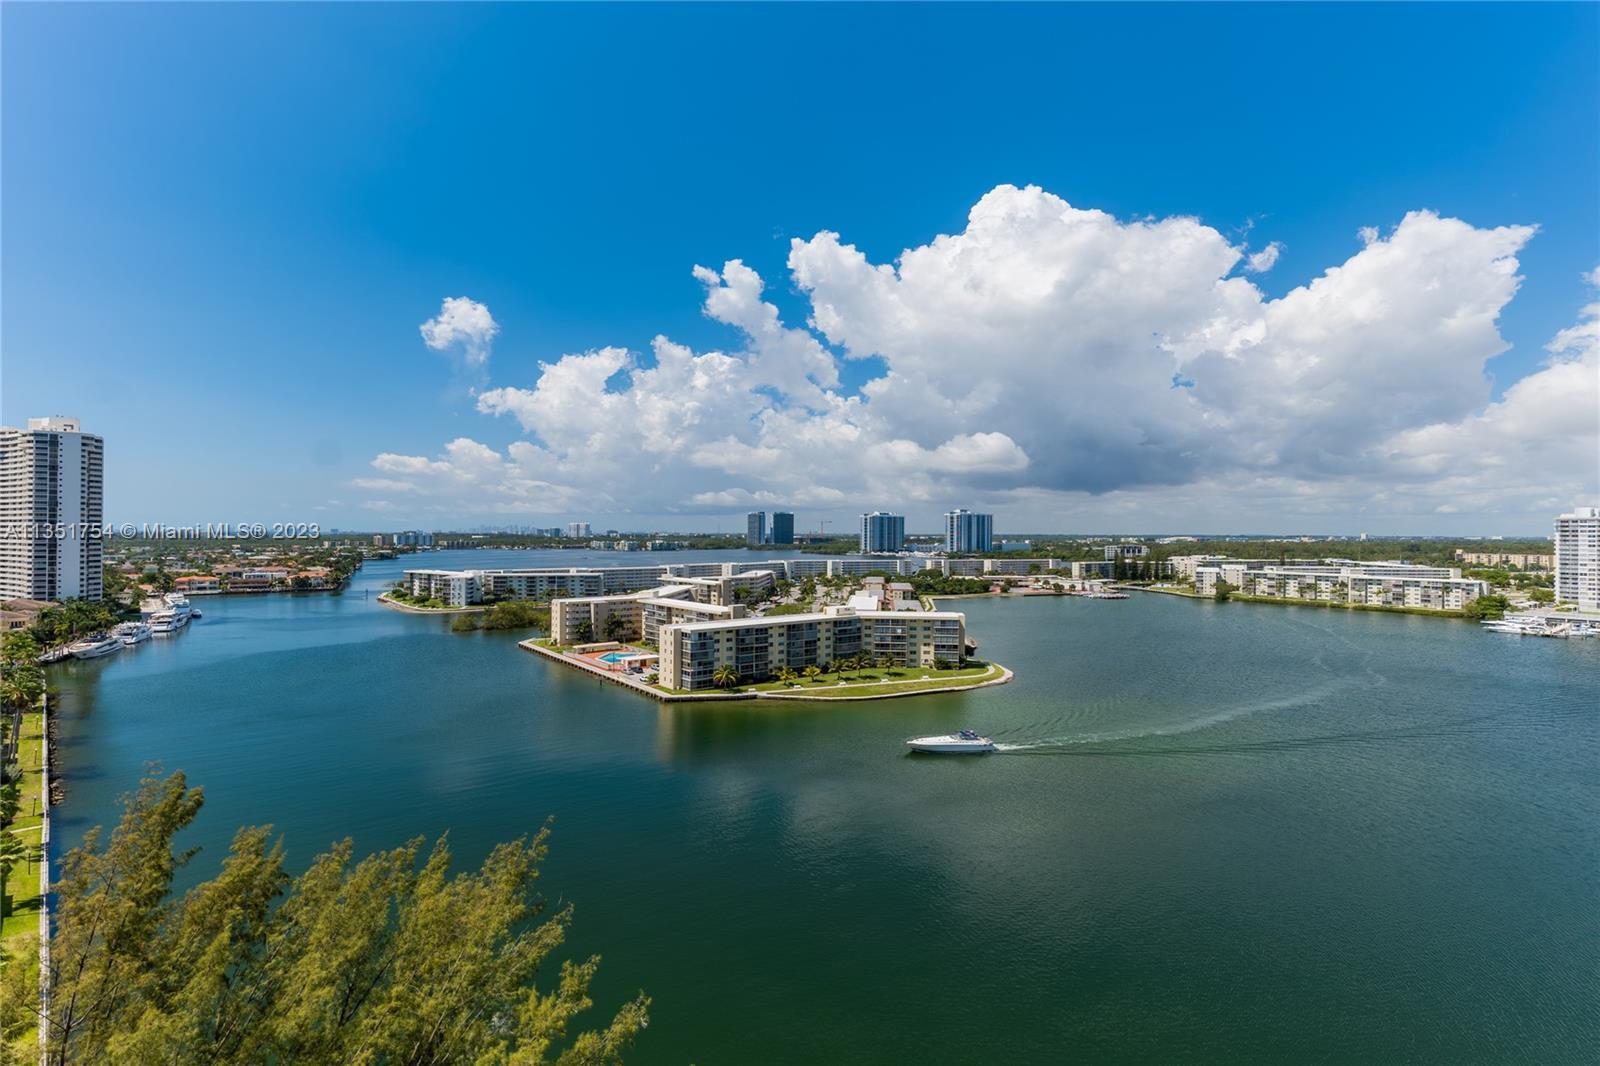 Rarely available and highly desires 09' line - Unobstructed water views from the 18th floor that all